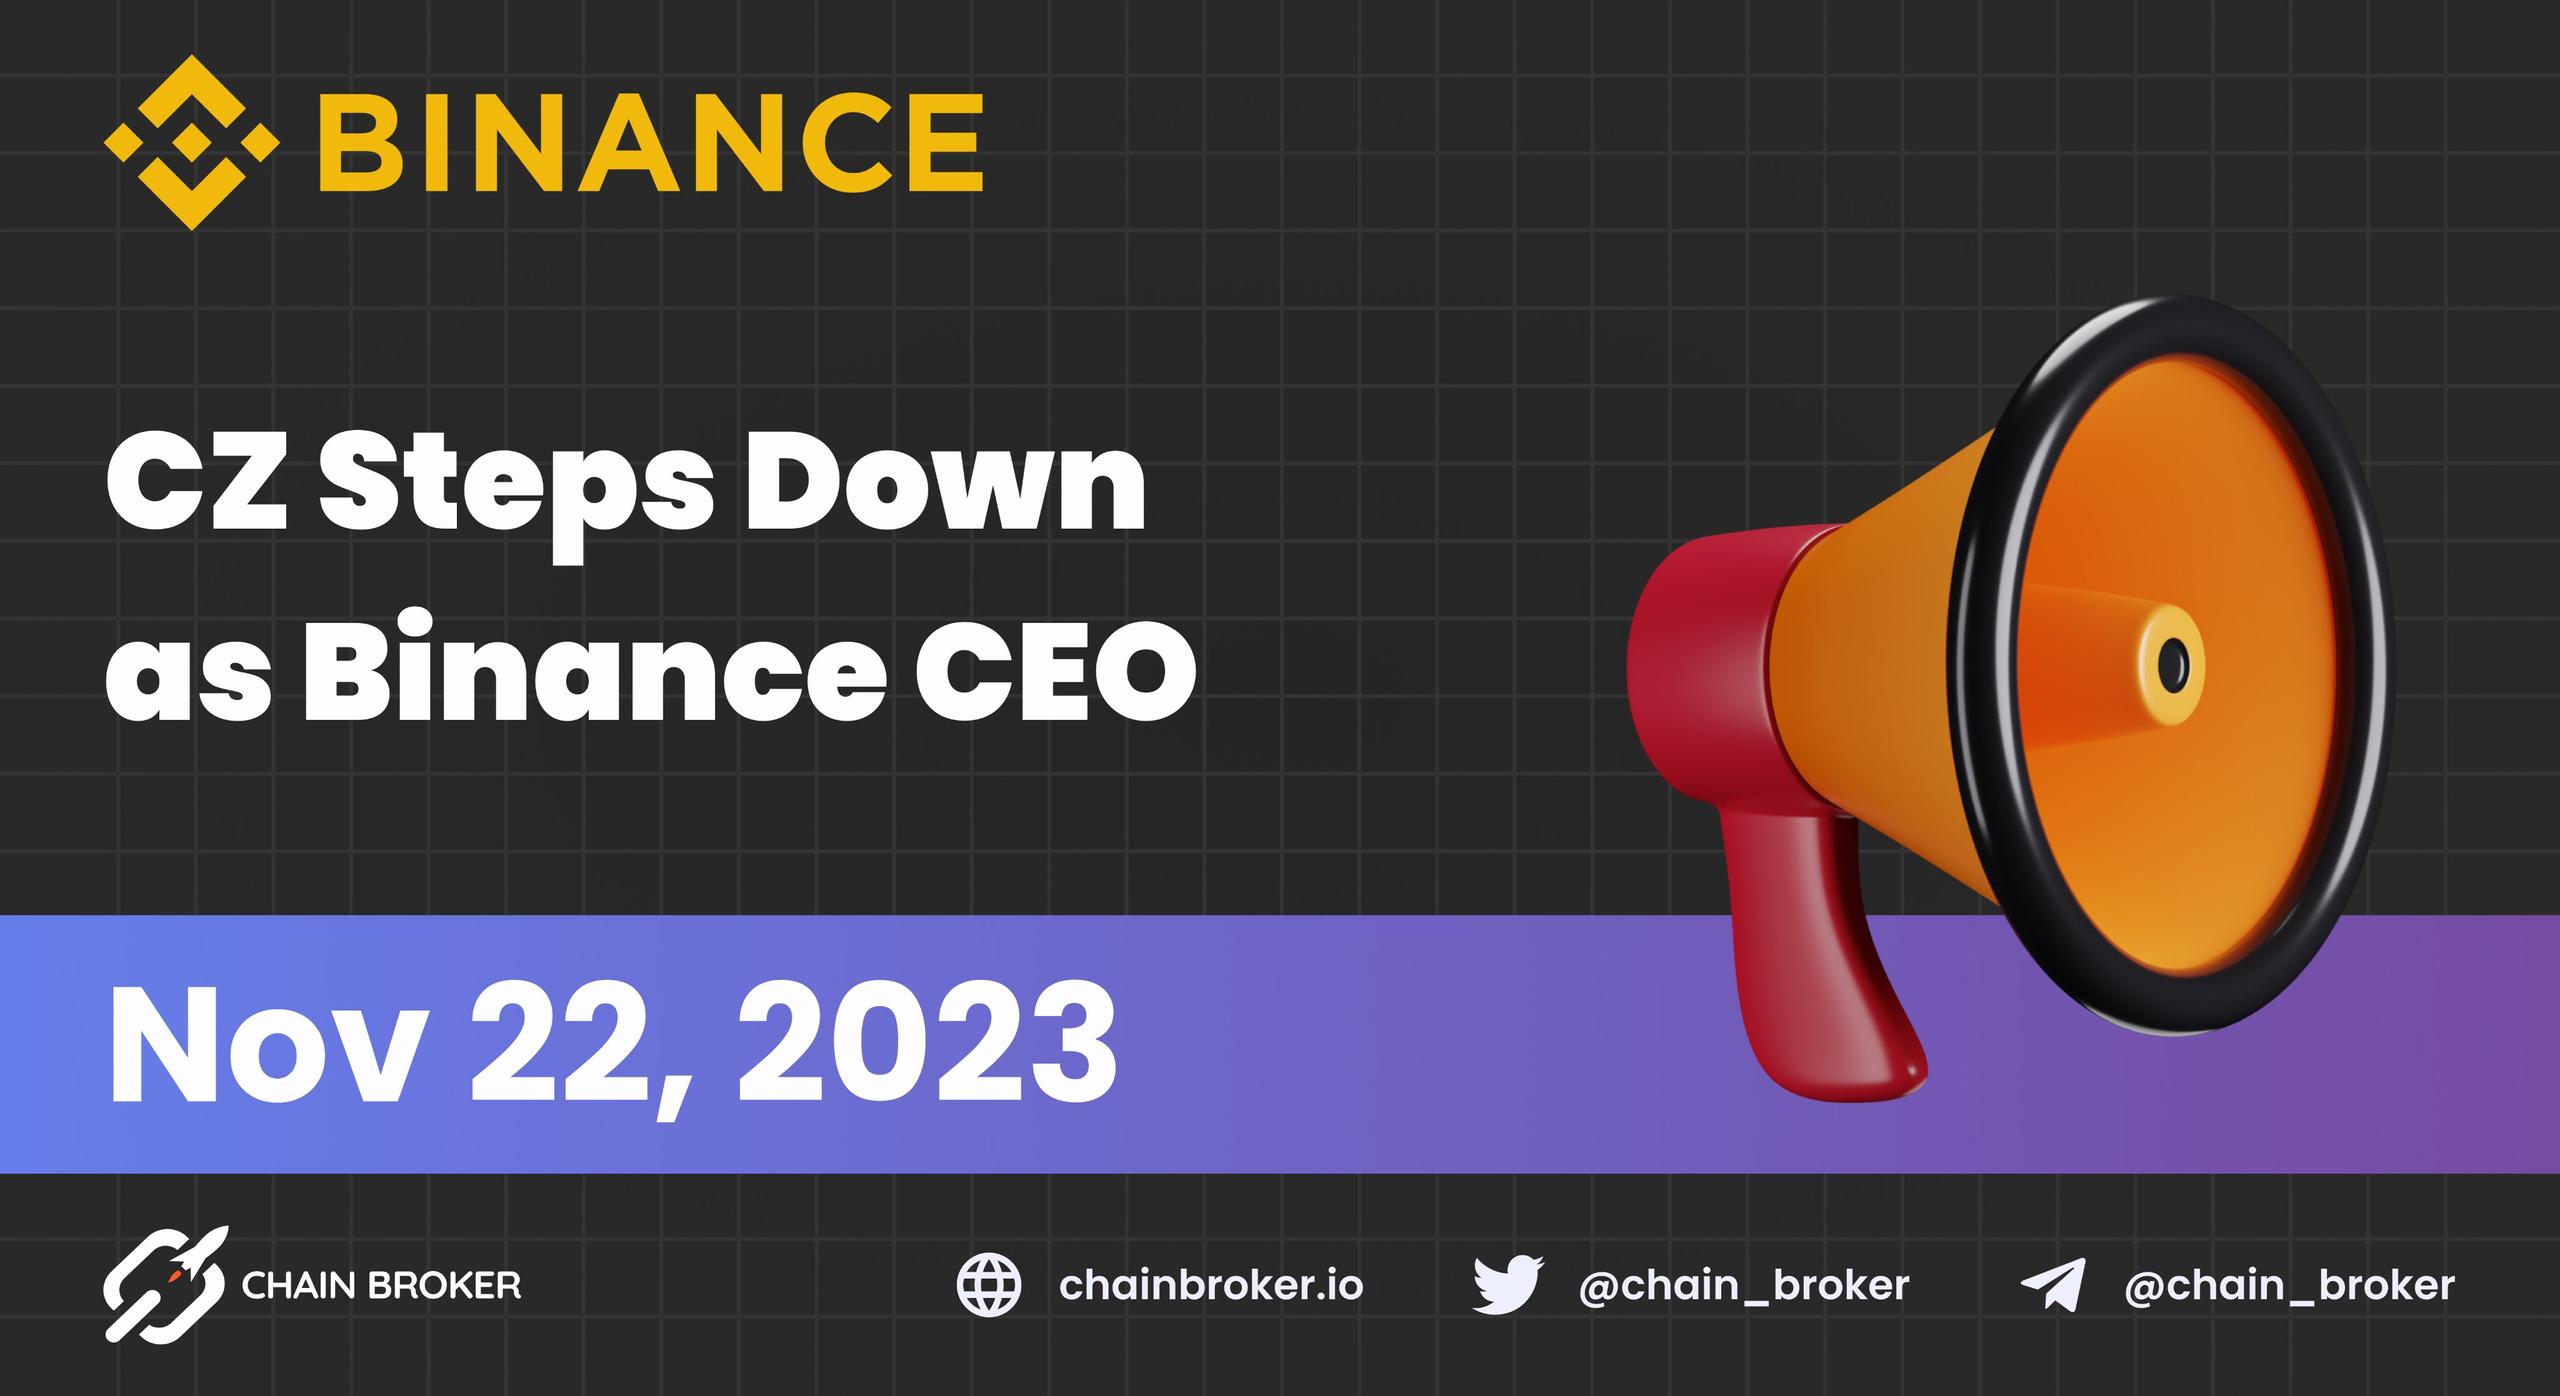 CZ Steps Down from being Binance's CEO